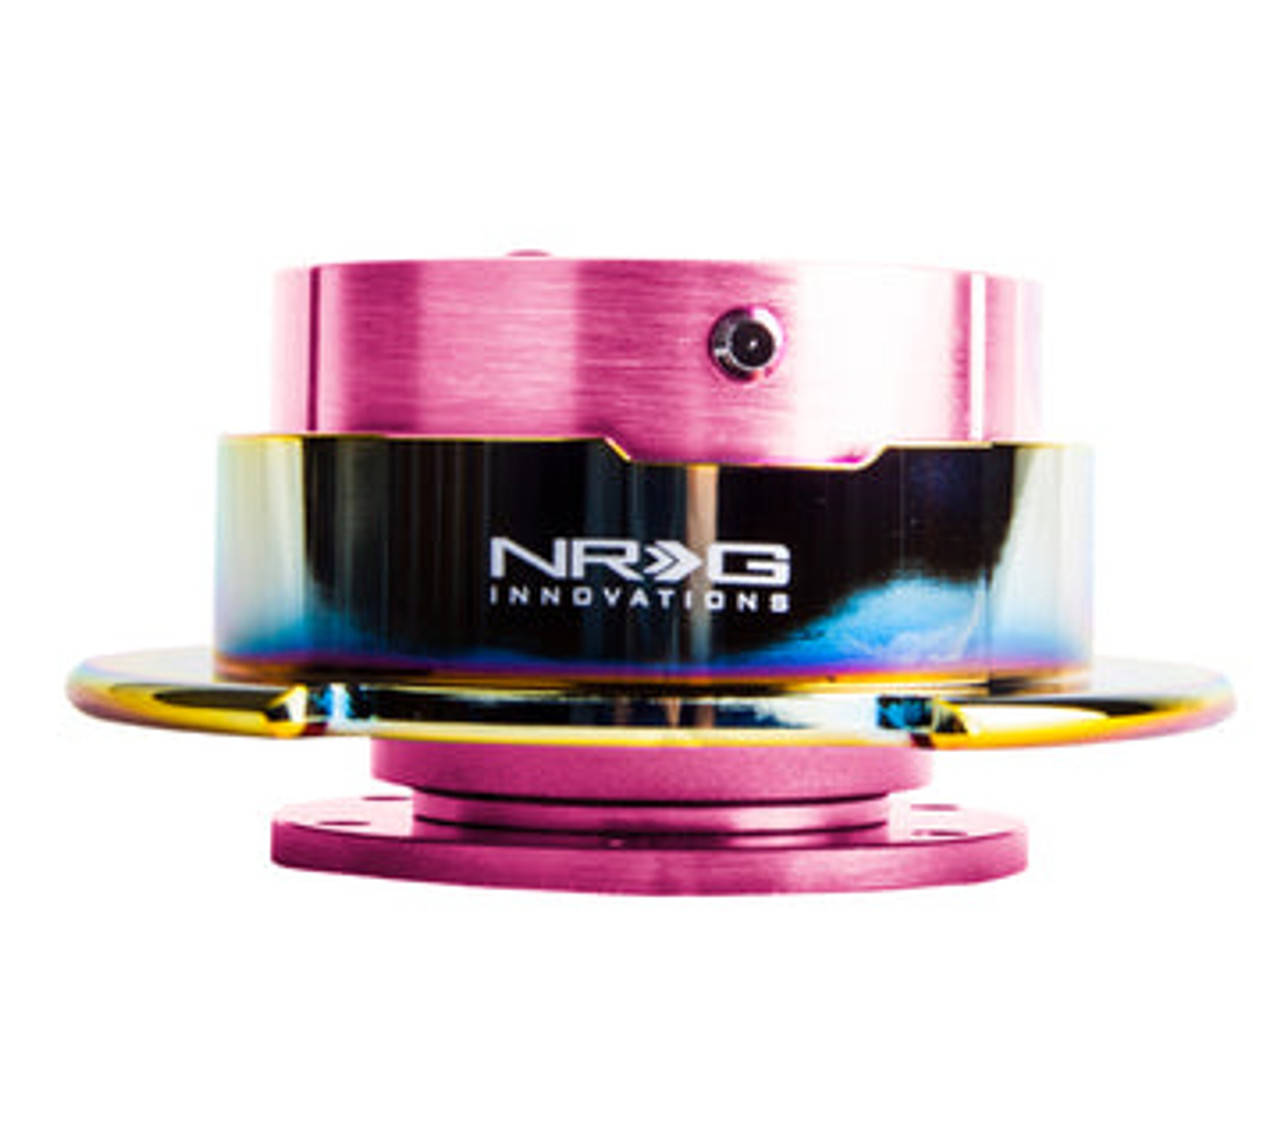 NRG 2.5 QUICK RELEASE